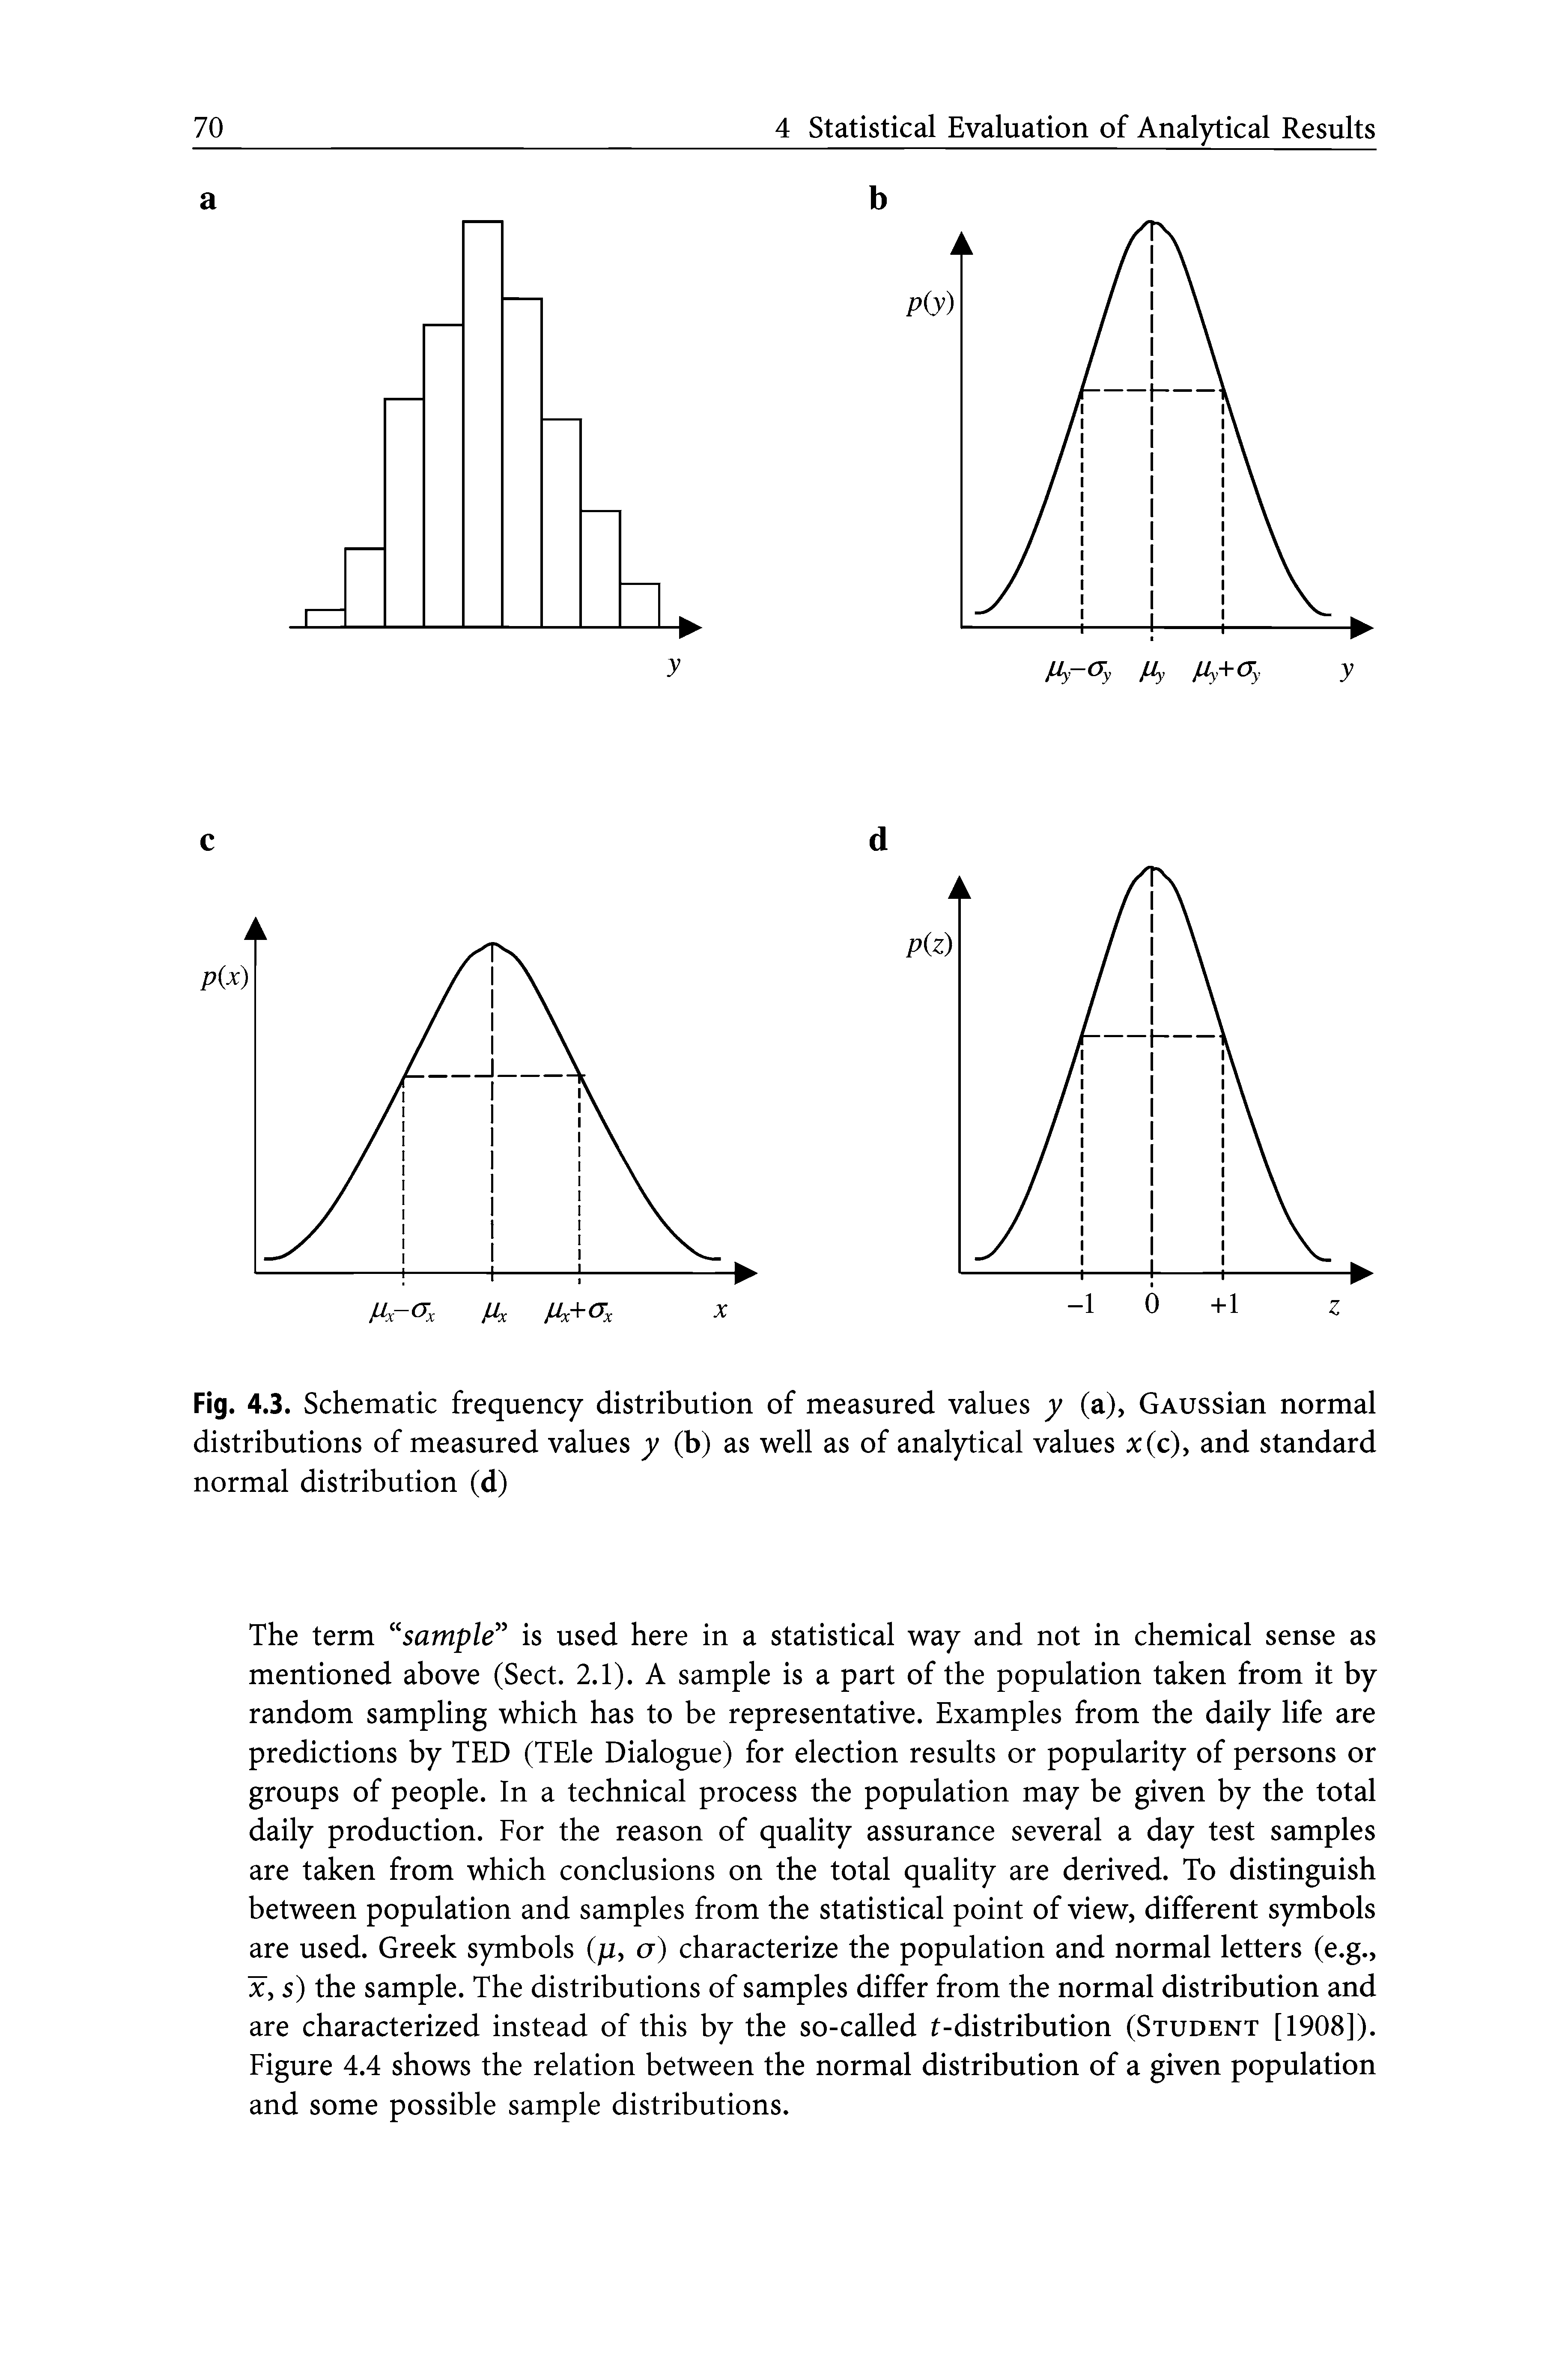 Fig. 4.3. Schematic frequency distribution of measured values y (a), GAUSsian normal distributions of measured values y (b) as well as of analytical values x(c), and standard normal distribution (d)...